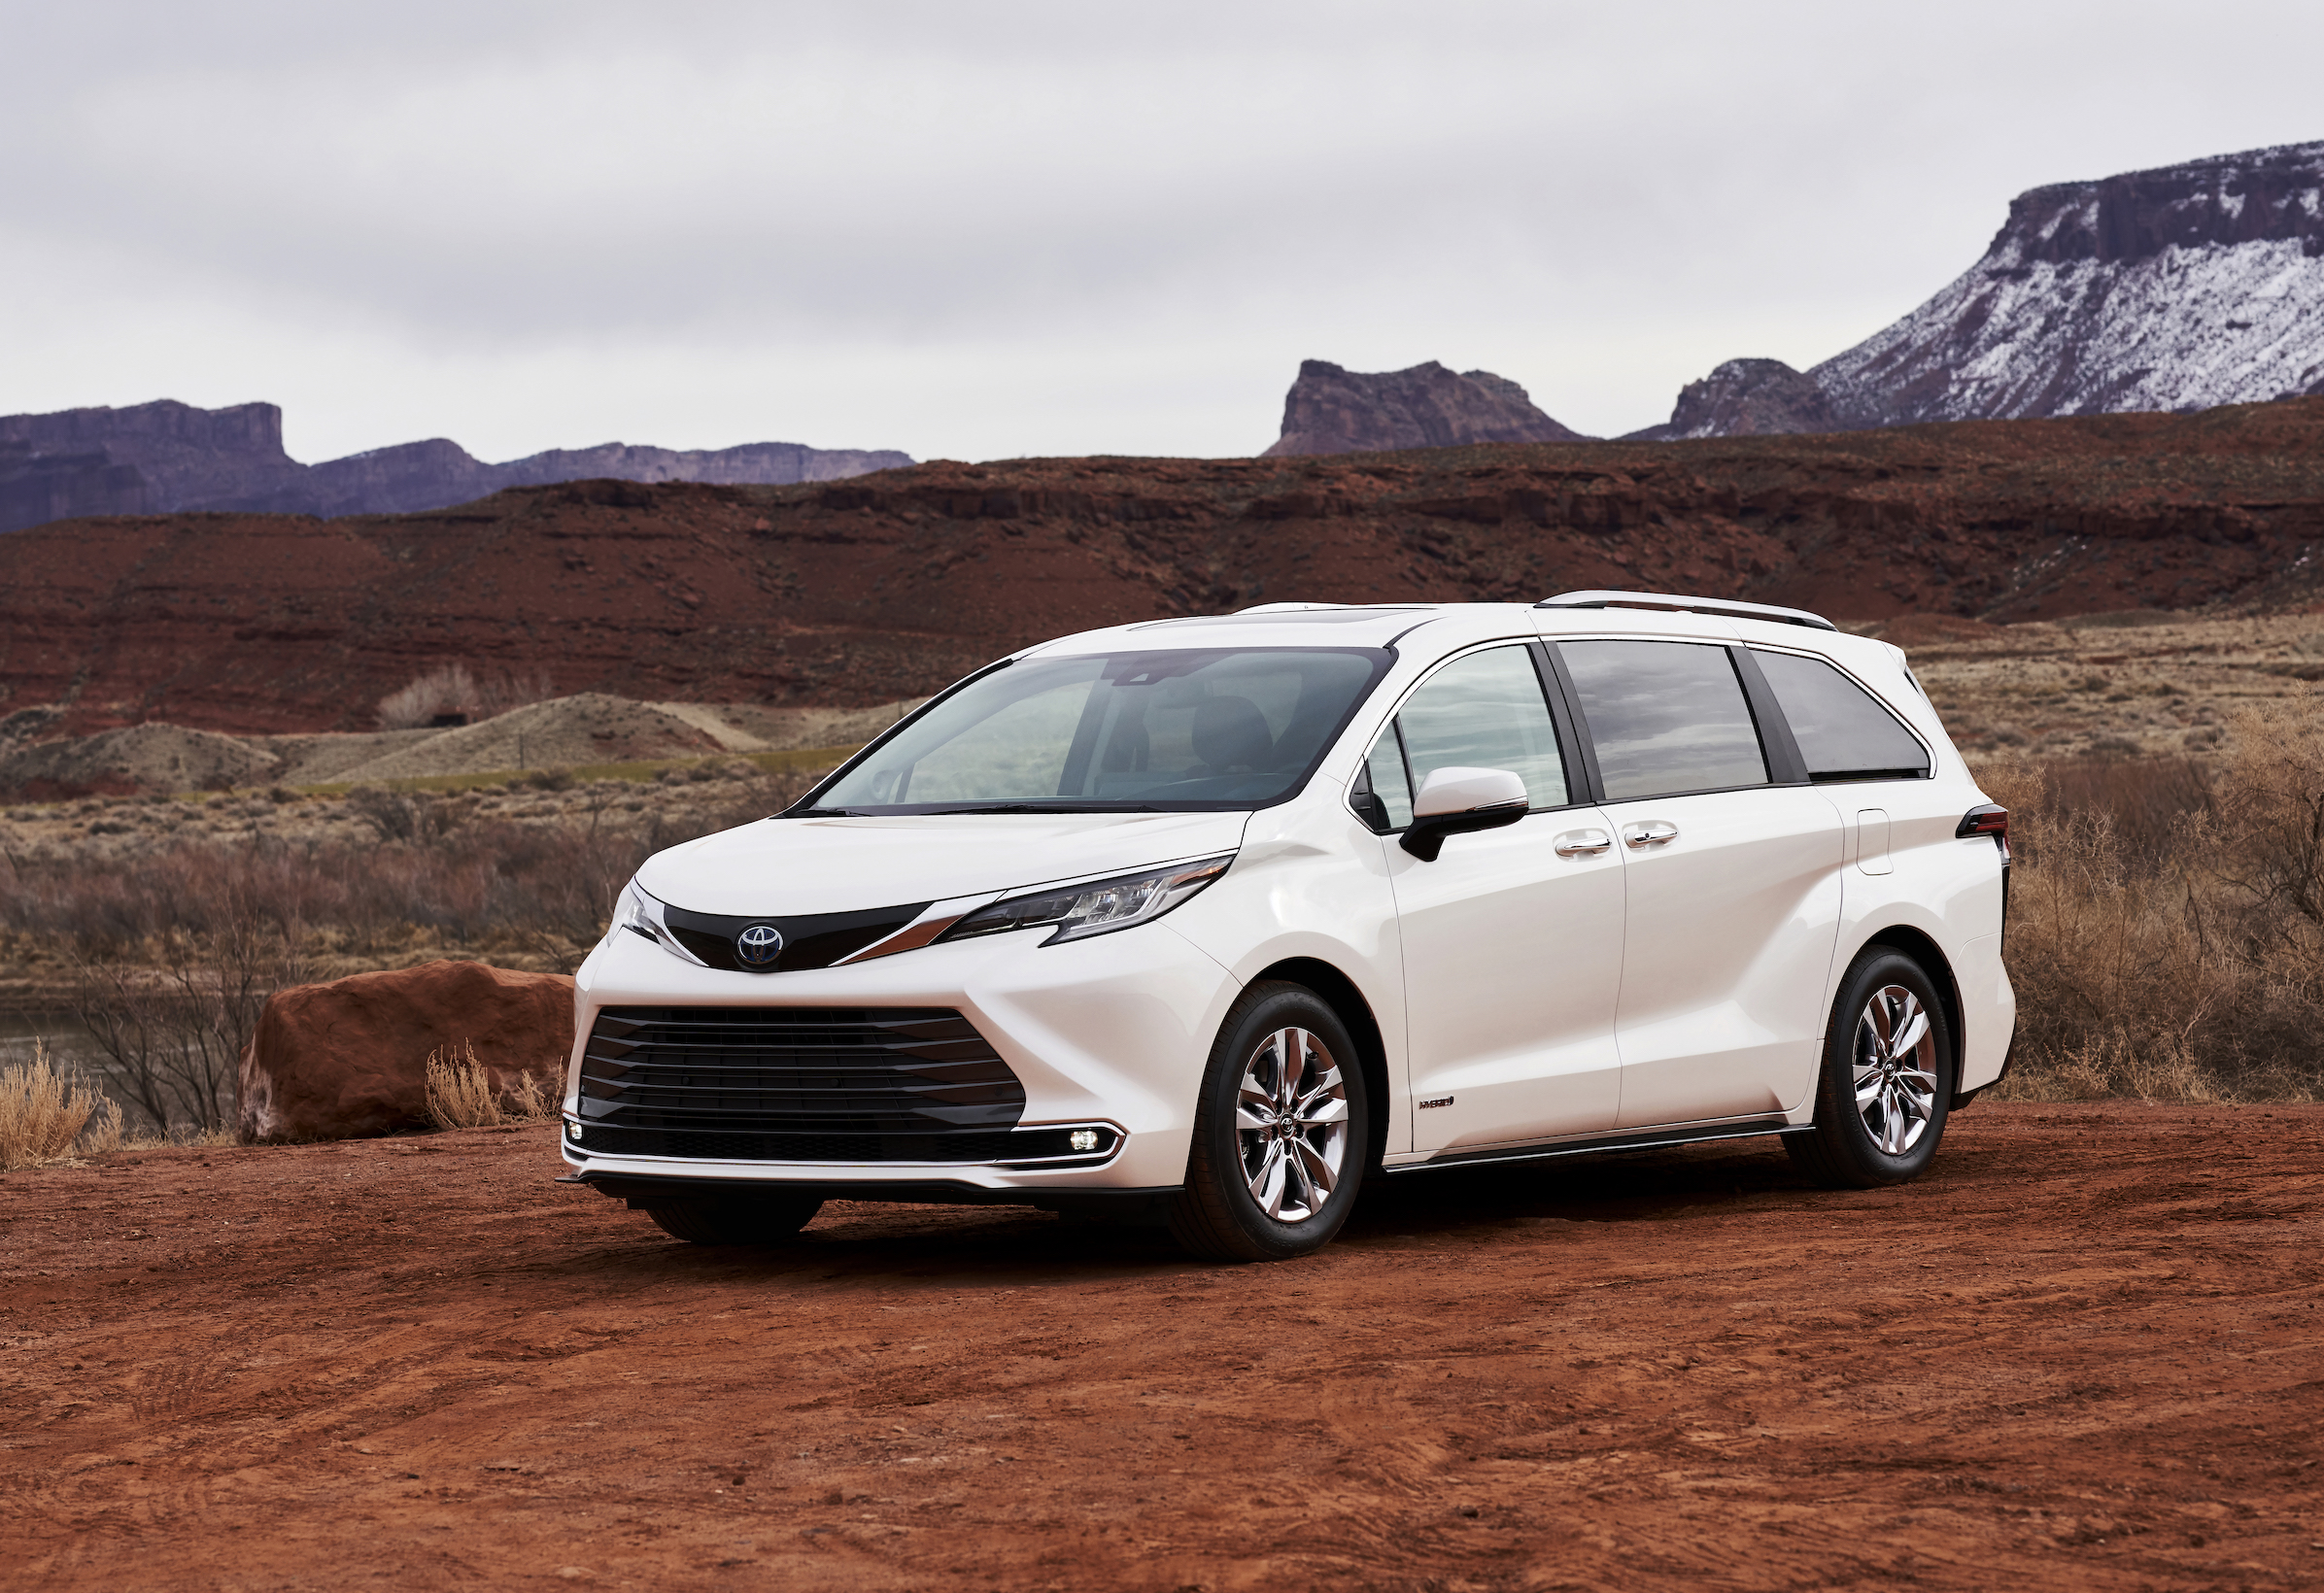 The 2021 Toyota Sienna Limited trim parked in the desert